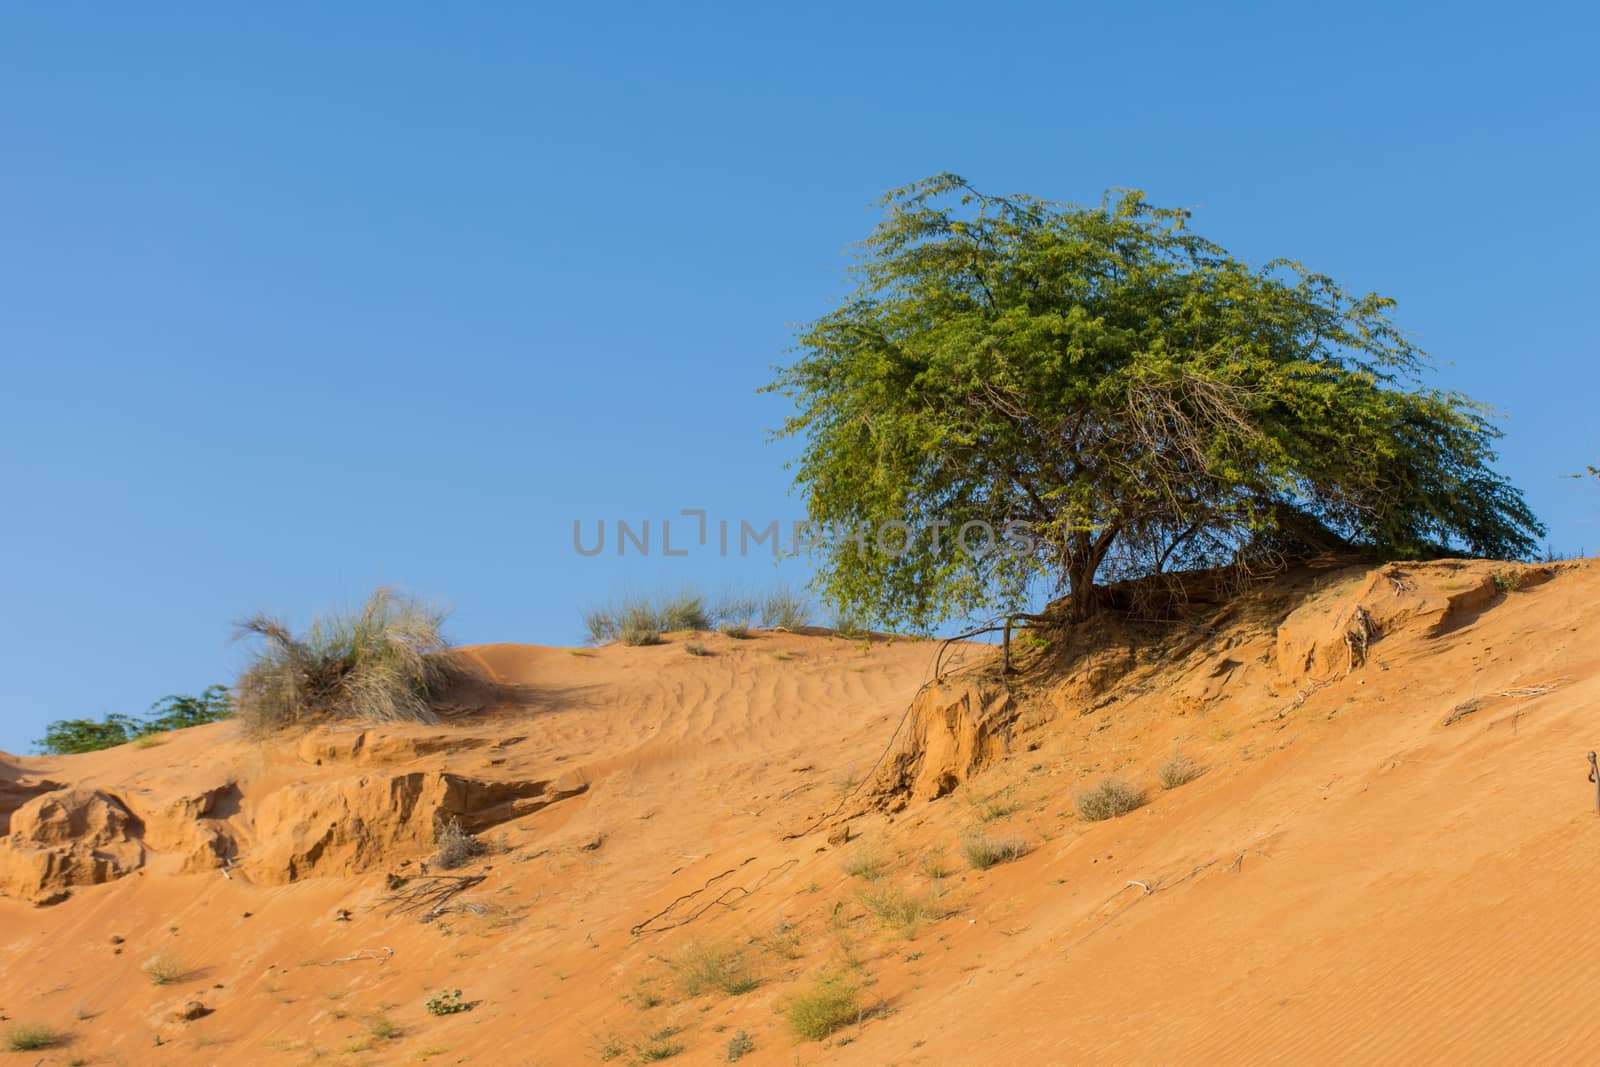 A green desert tree sits among dry sticks in the patterned and textured orange sand with a blue sky background in the United Arab Emirates.